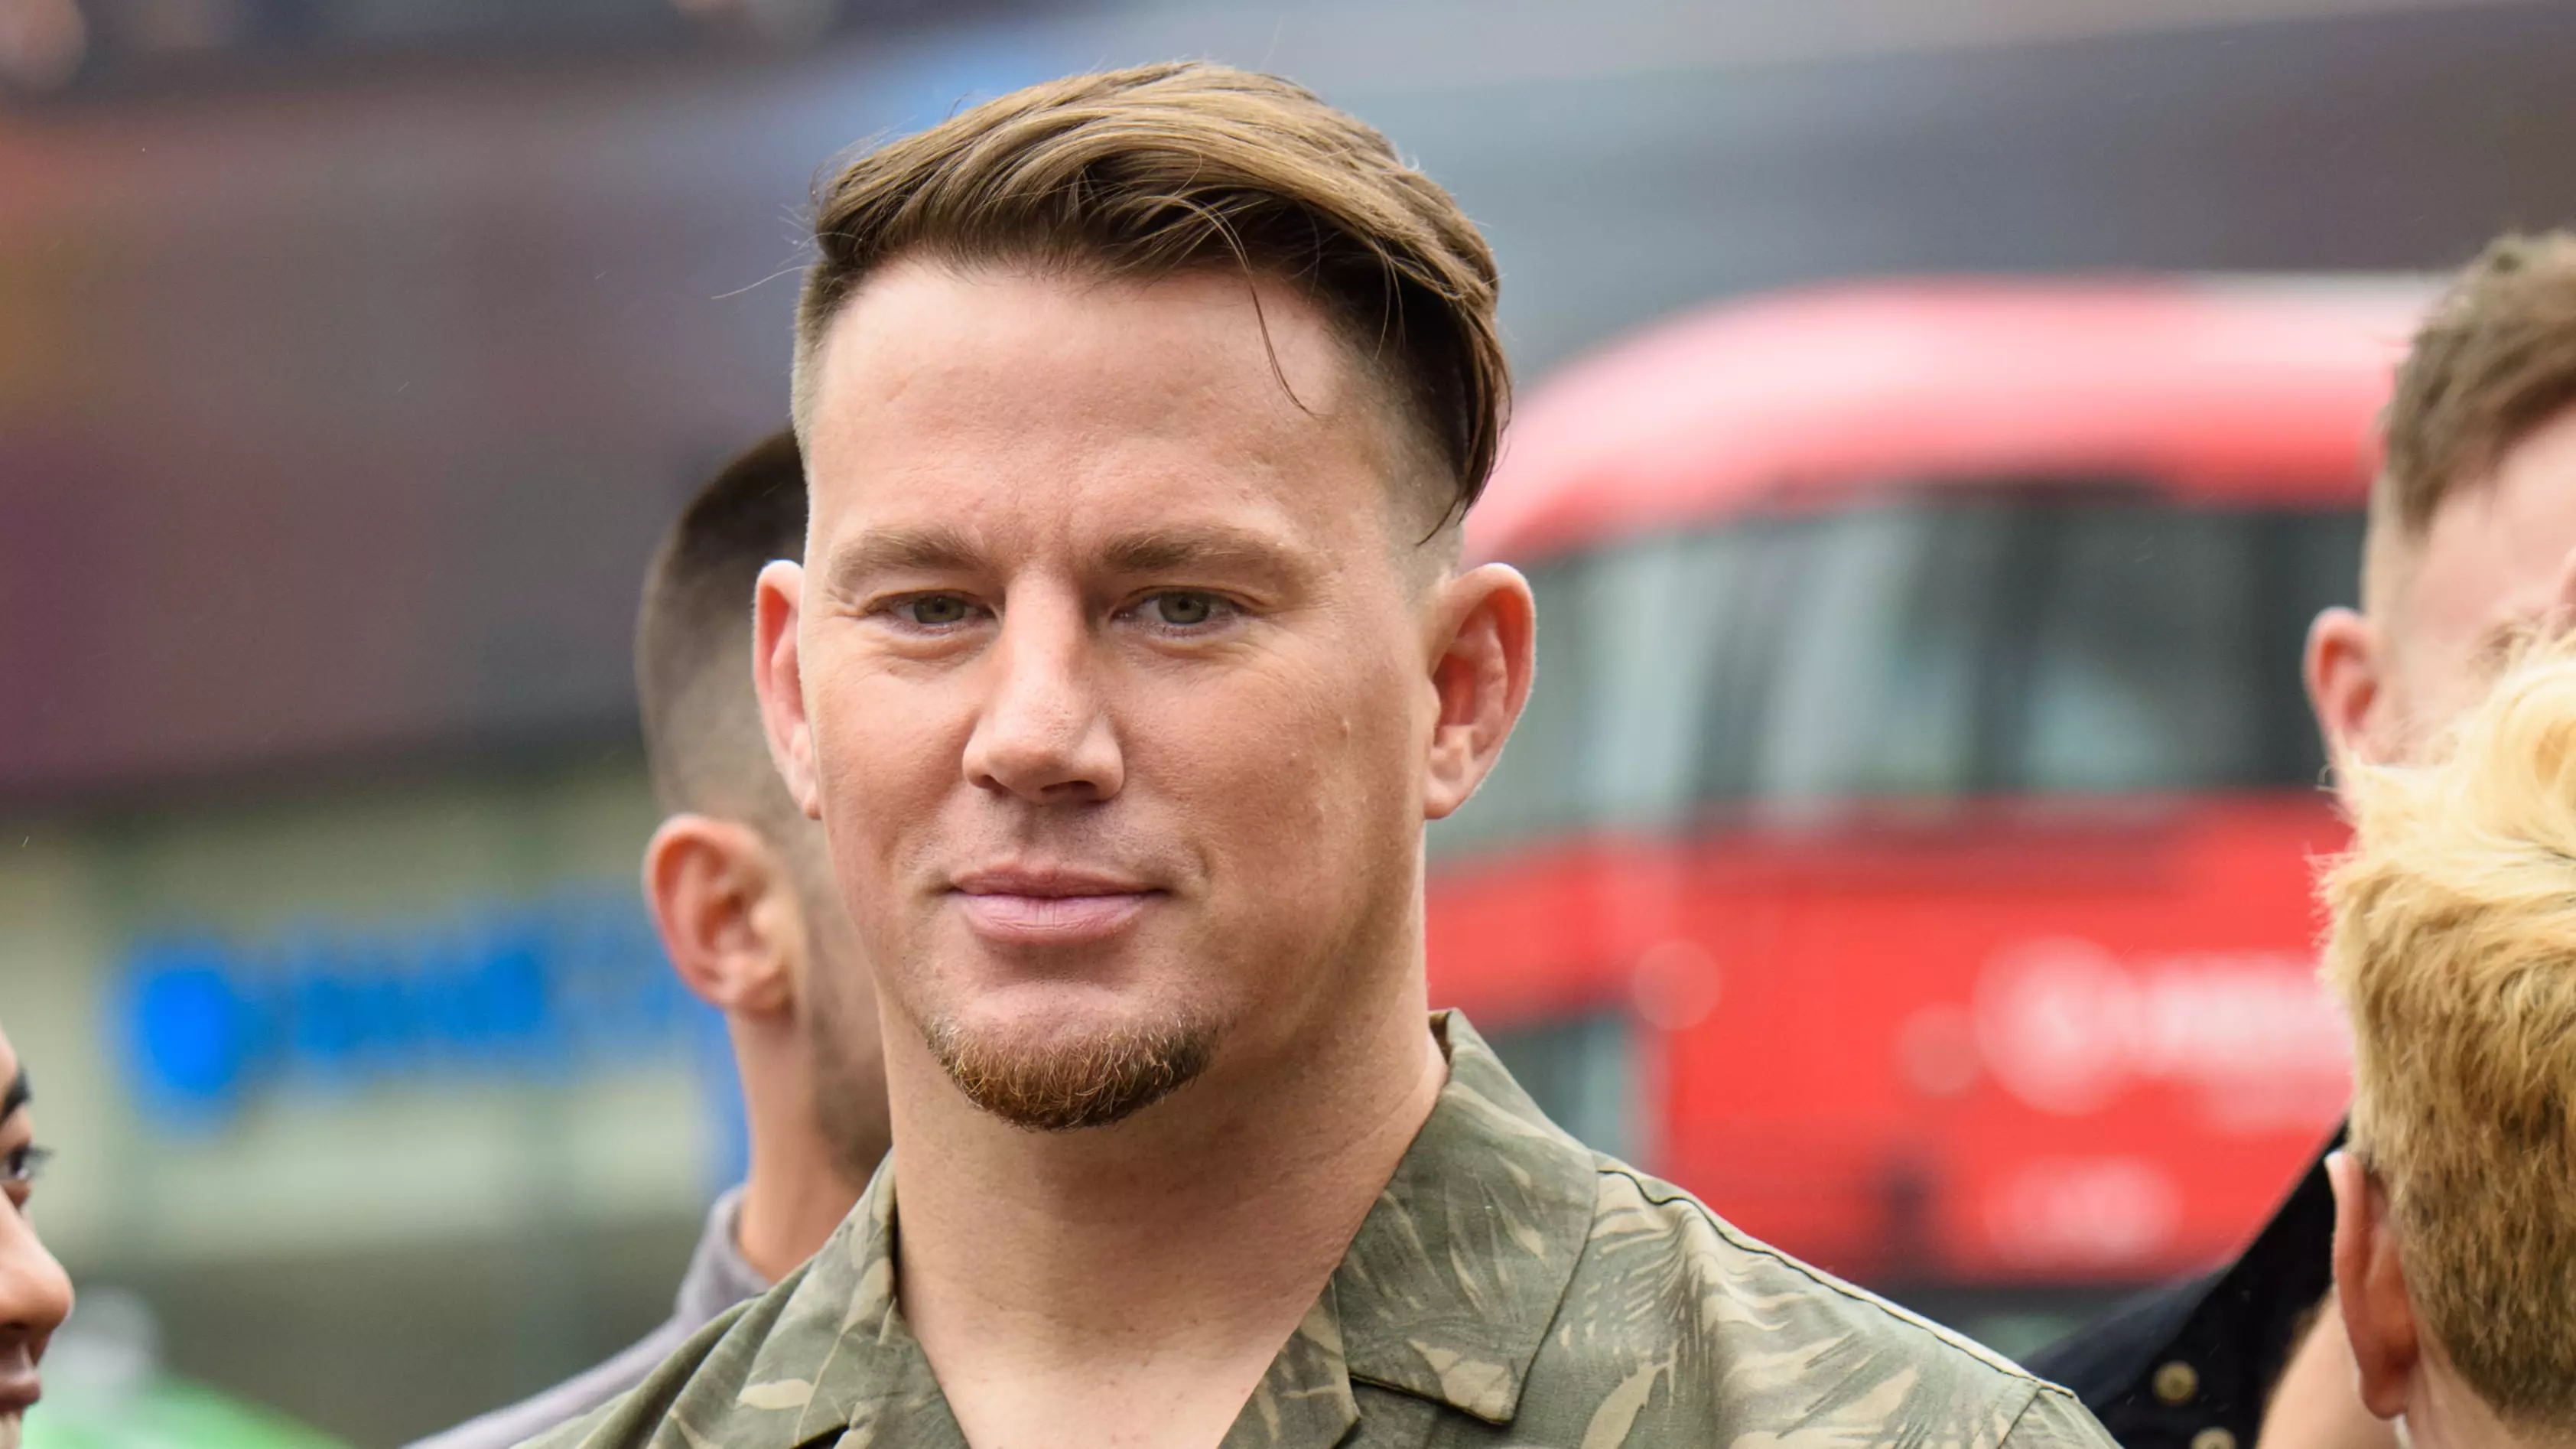 Channing Tatum Strips Off After Losing At Jenga To Girlfriend Jessie J